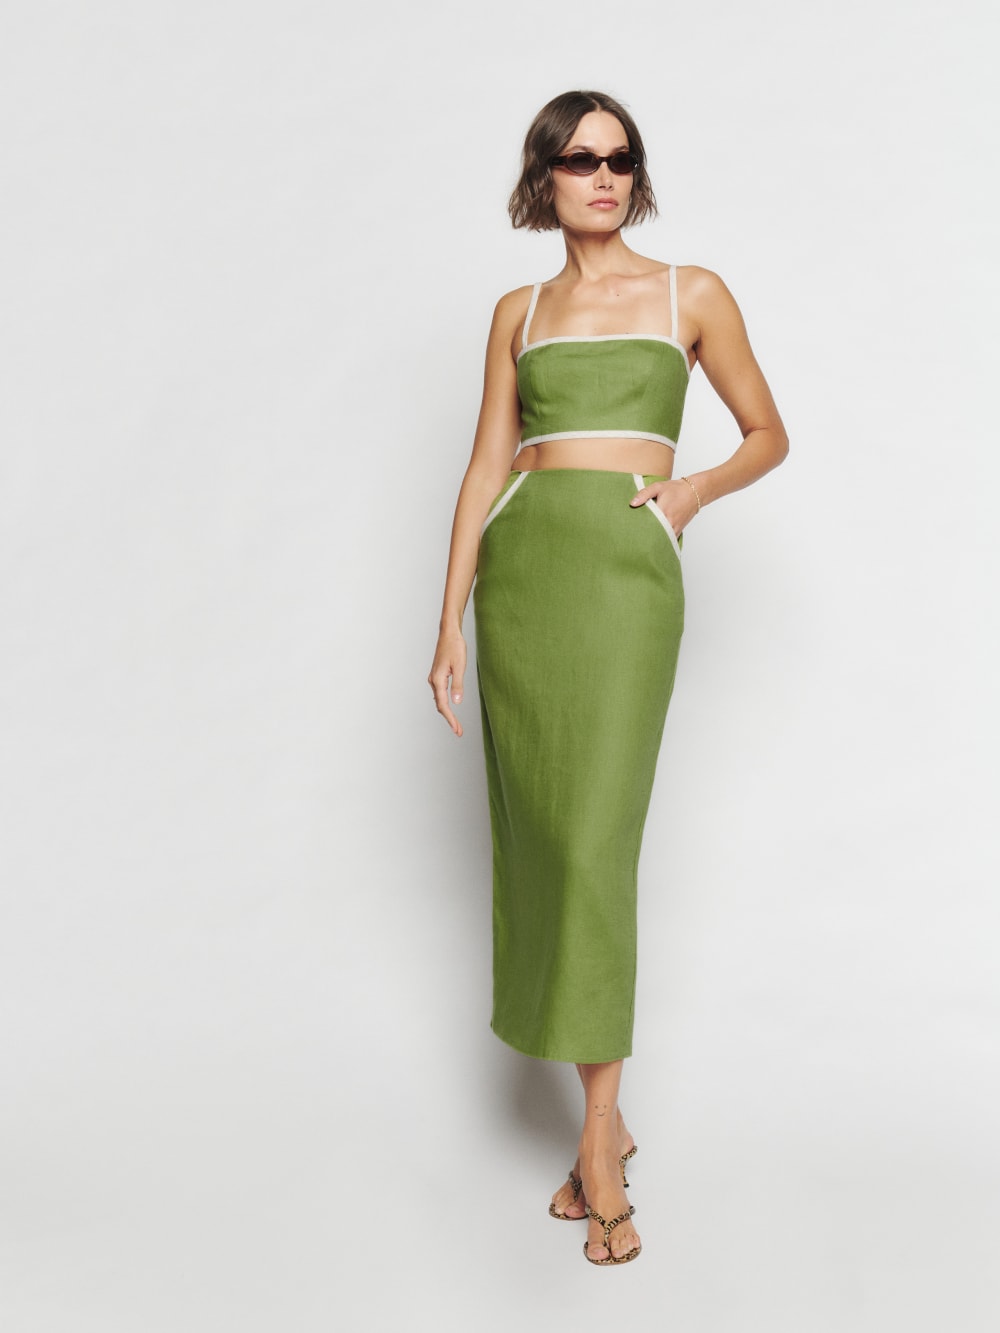 Spice up your summer party looks with Reformation's Elena Linen Two Piece in Avocado Green. It consists of a crop top and linen pencil midi skirt. The top has adjustable straps and straight neckline with white trim detail. The slim fitted skirt has front pockets with white trim detail. 